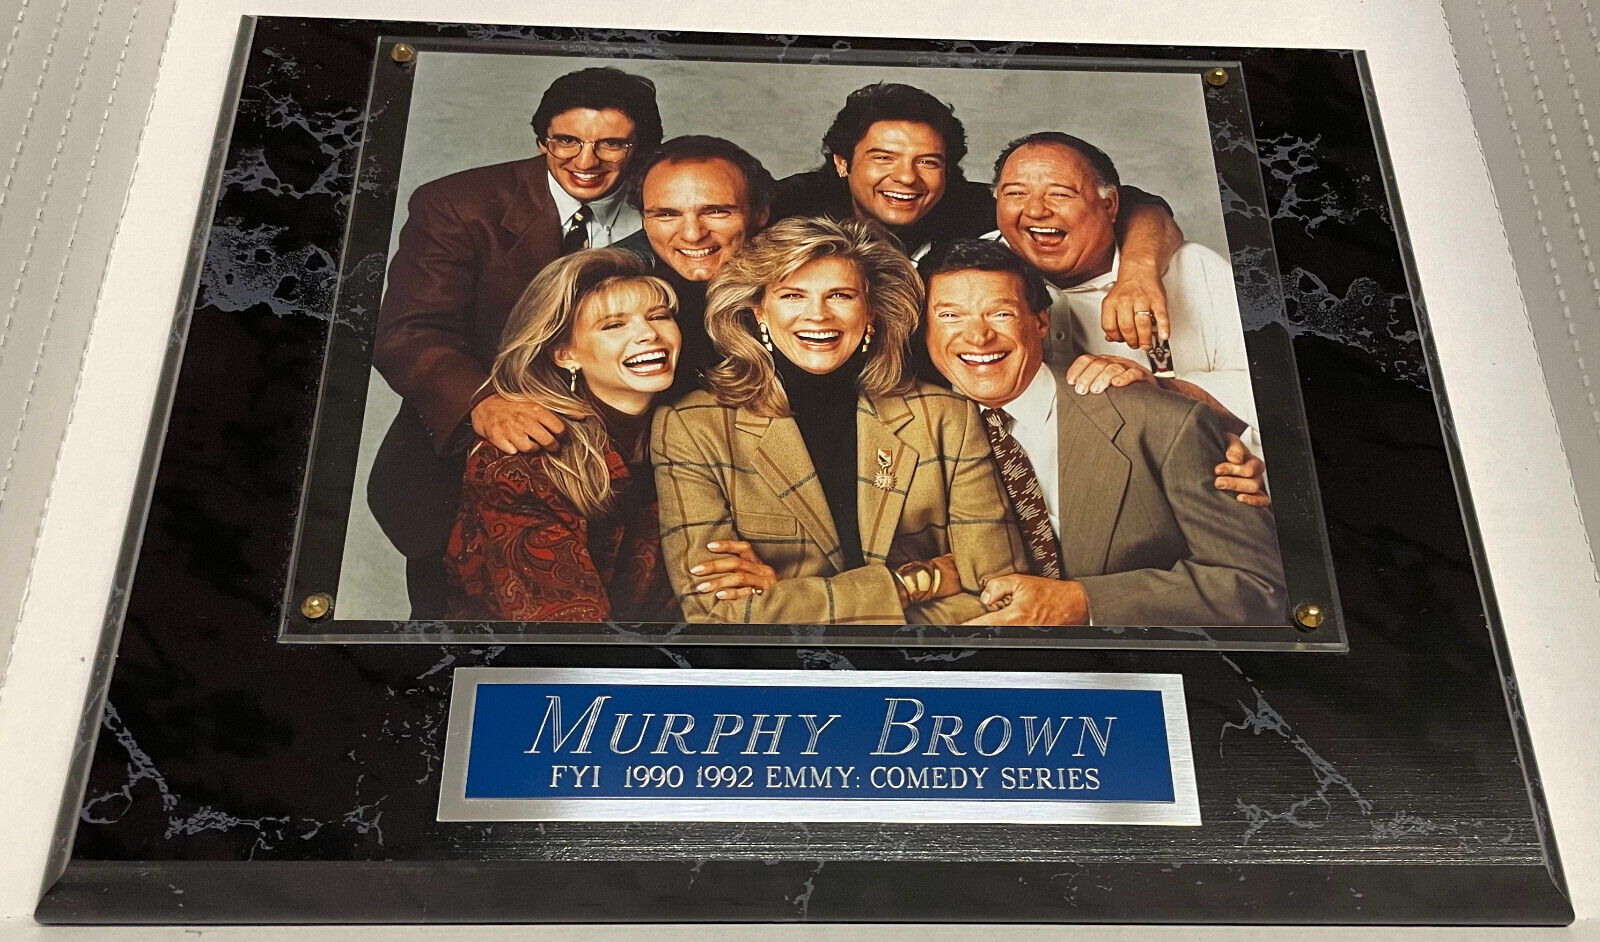 *SALE*  MURPHY BROWN CAST FRAMED 8X10 PHOTO-12X15 WALL PLAQUE DISPLAY